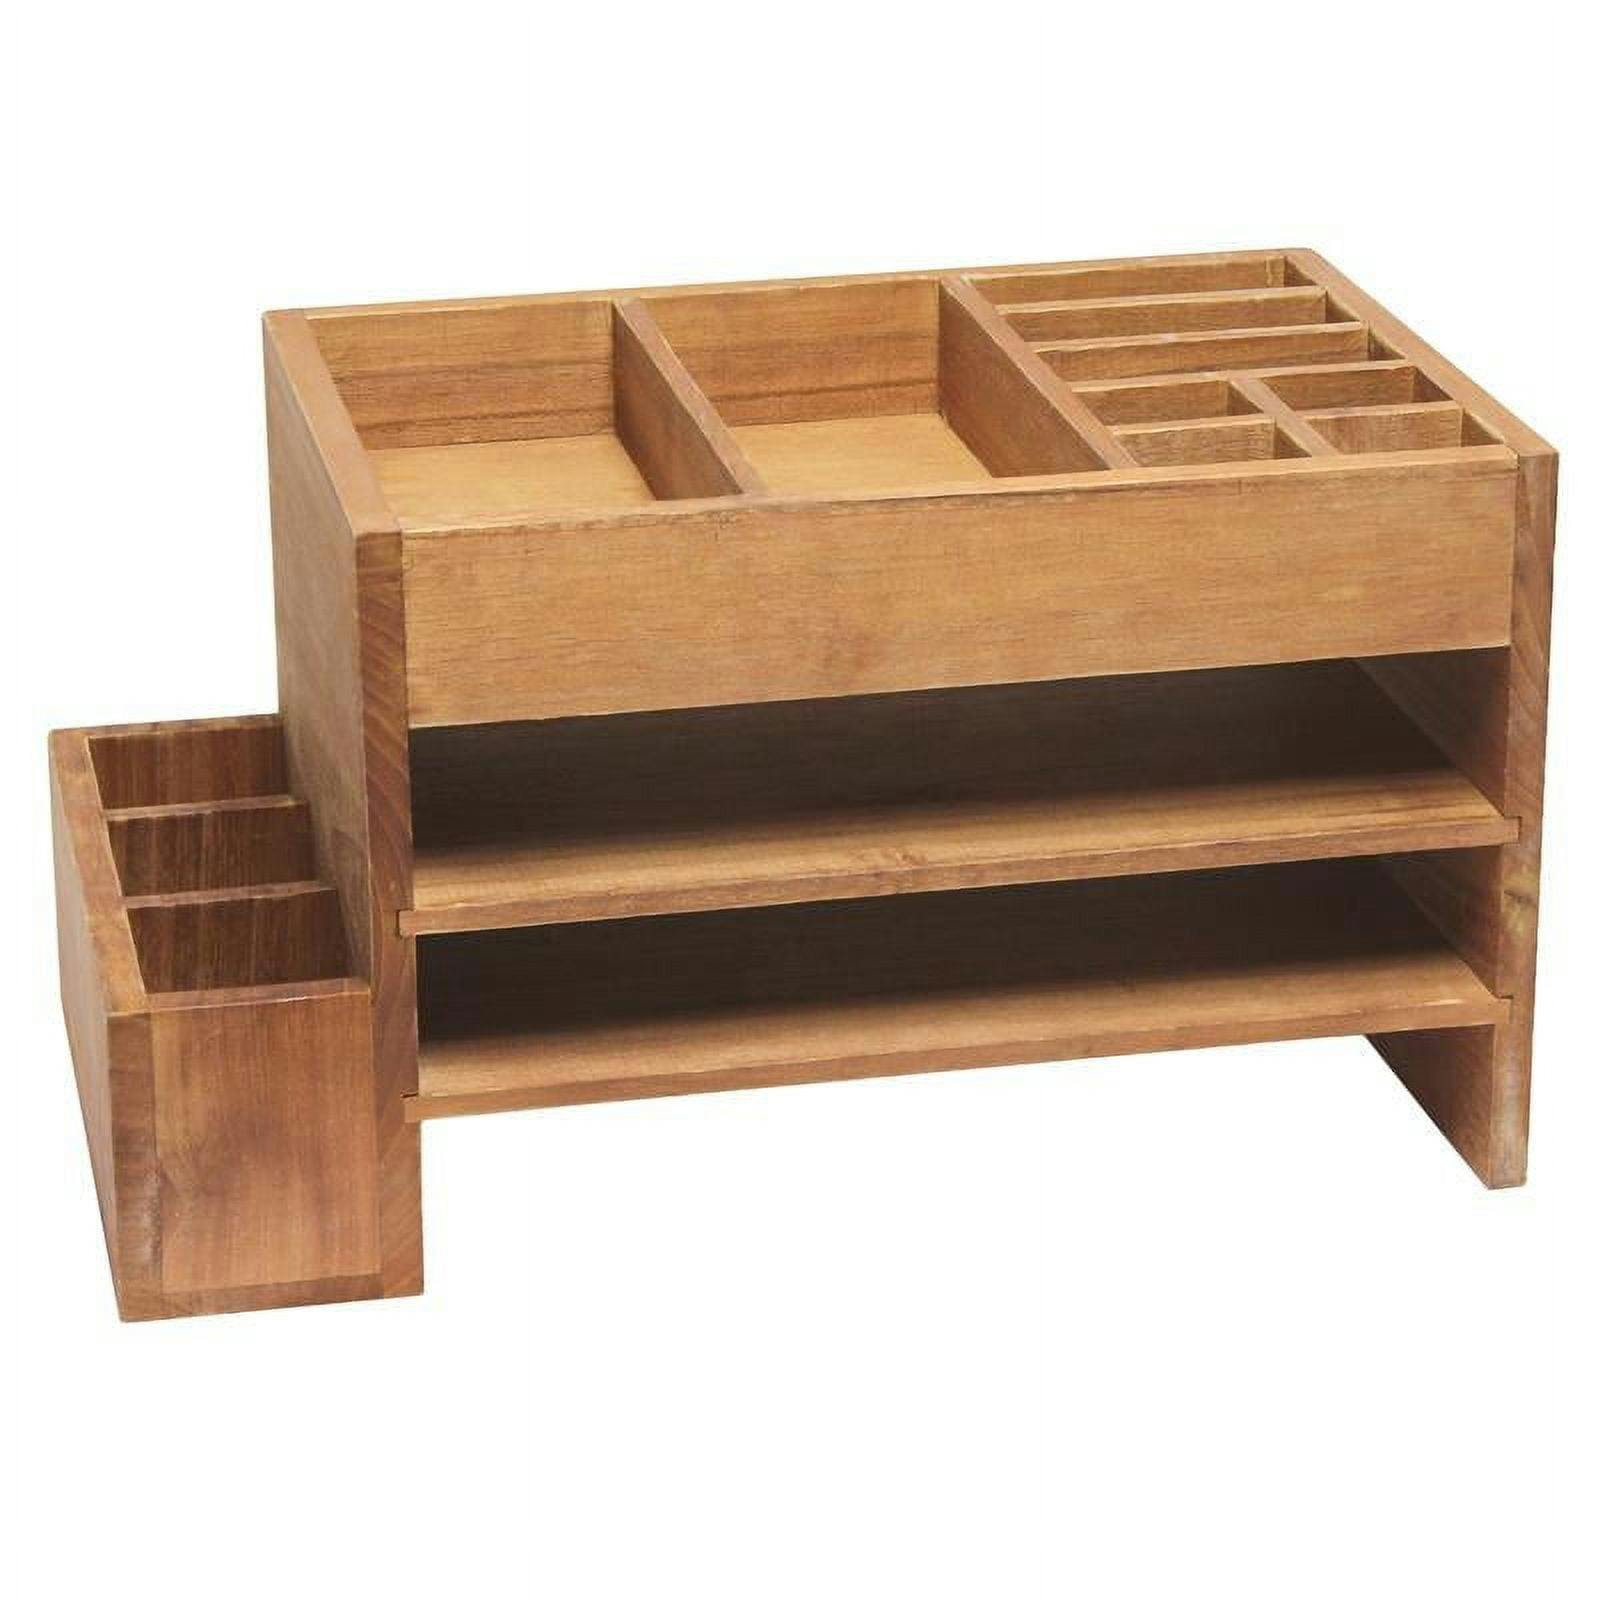 Natural Wood 15.5" Tiered Desk Organizer with 12 Compartments